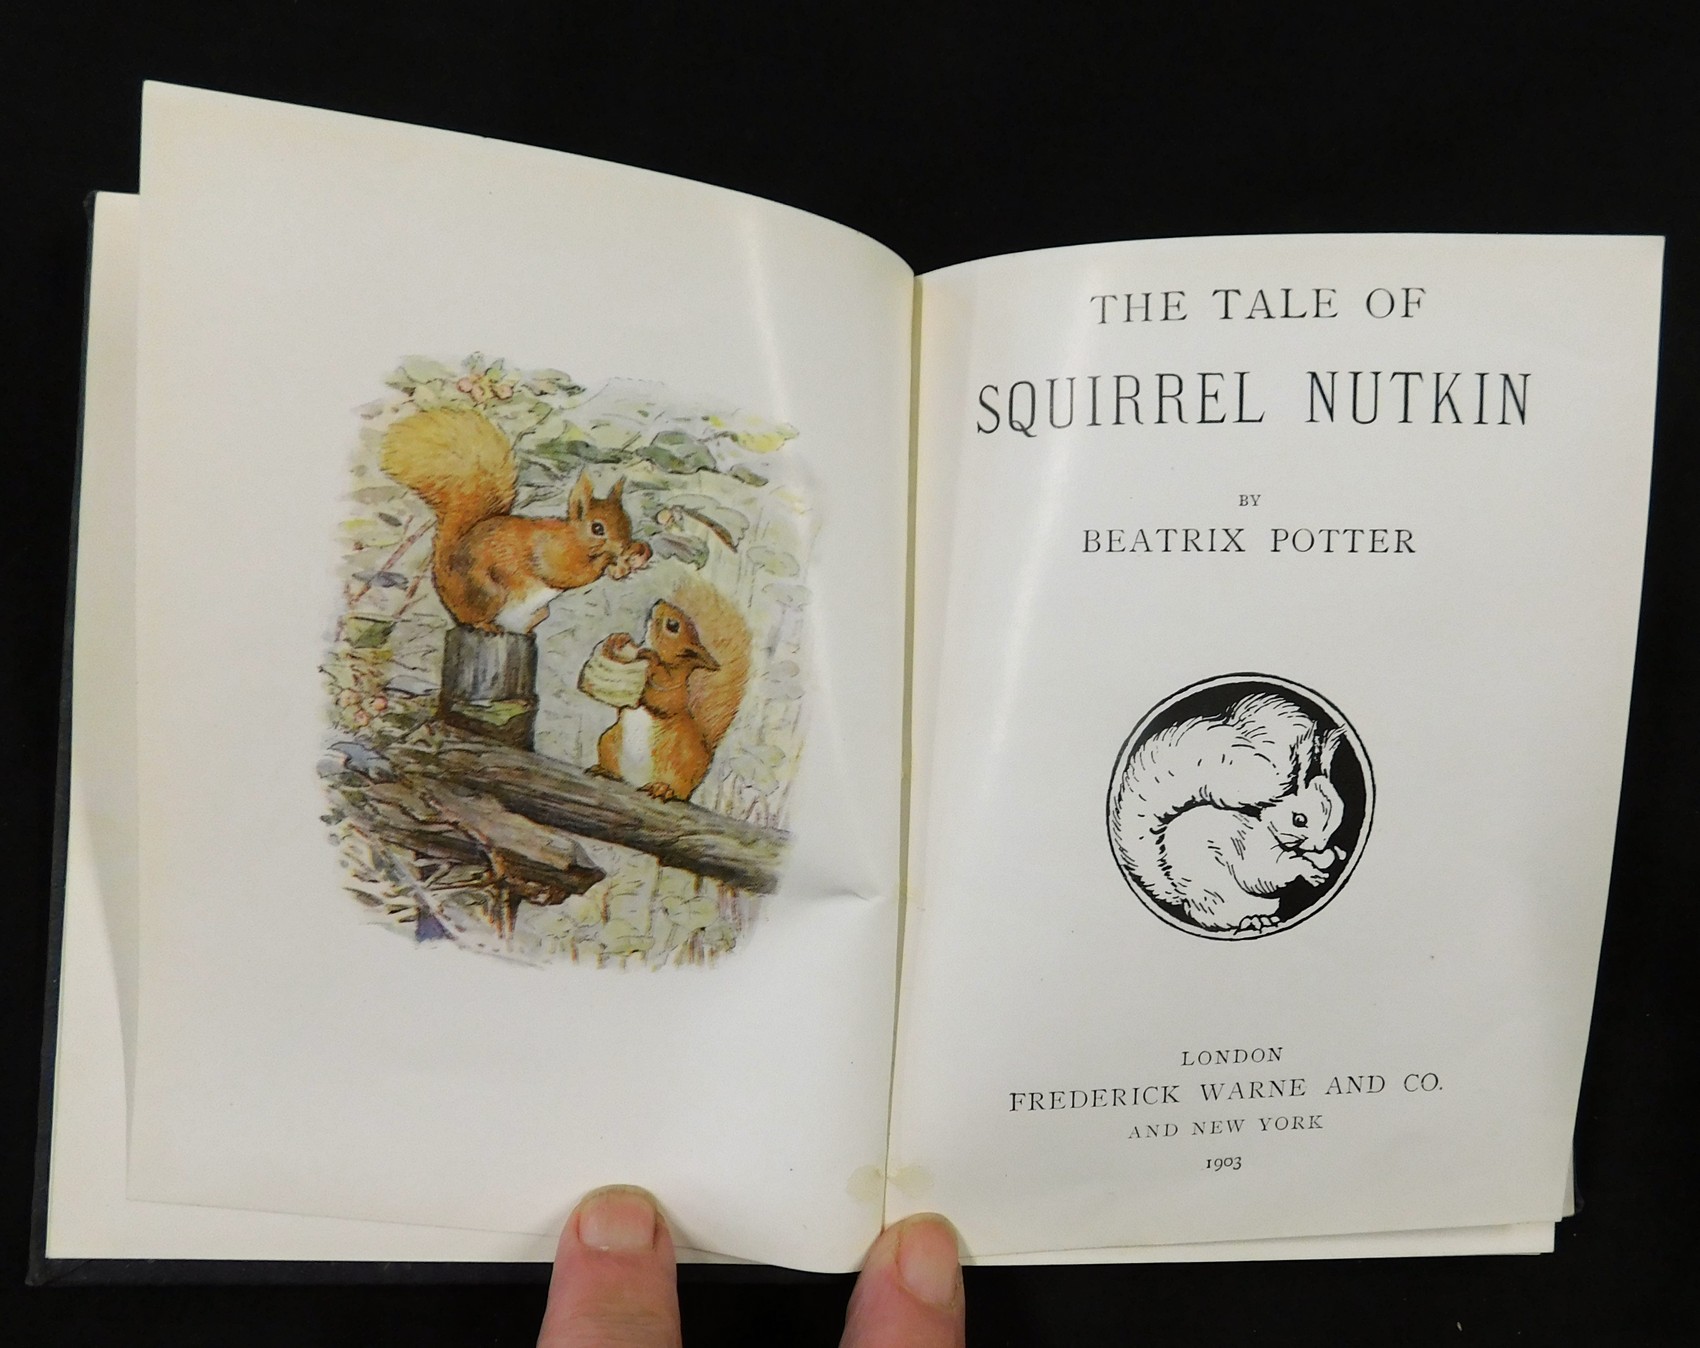 BEATRIX POTTER: THE TALE OF SQUIRREL NUTKIN, London and New York, Frederick Warne, 1903, 1st - Image 2 of 3